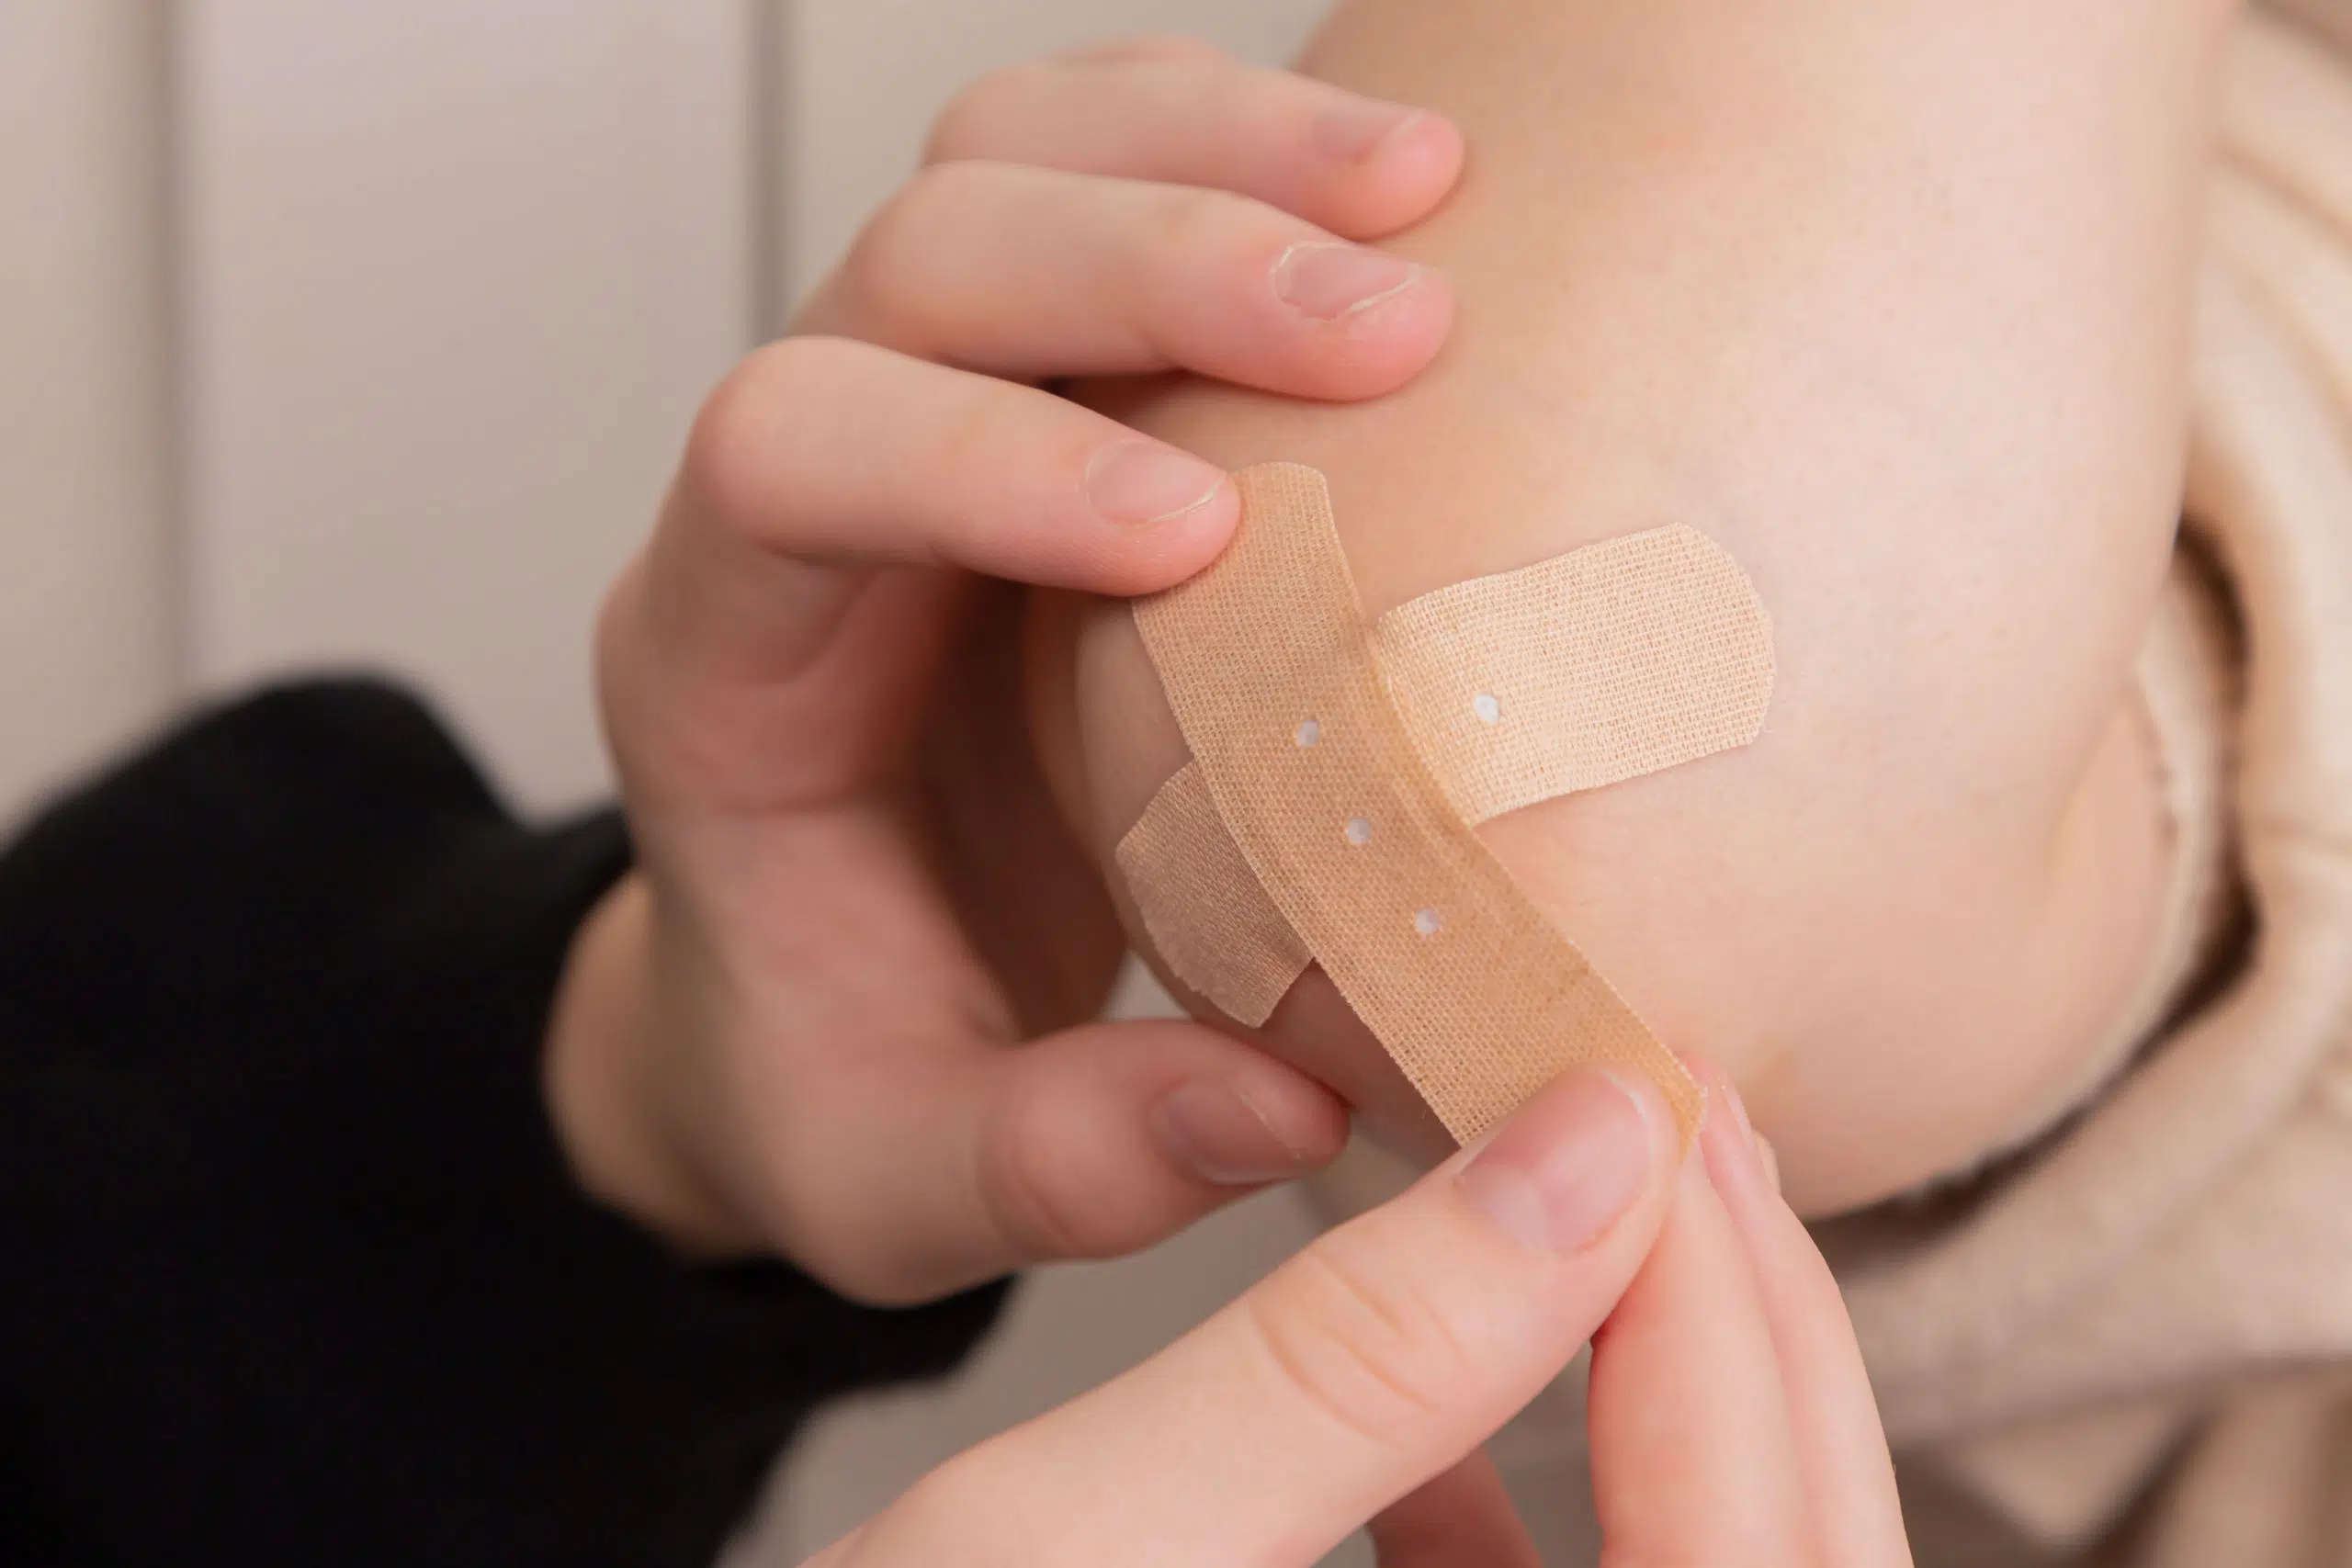 In Quebec, if you’re in public, it’s against the law to remove your band-aid. / #CanadaDo / Weird Laws in Quebec